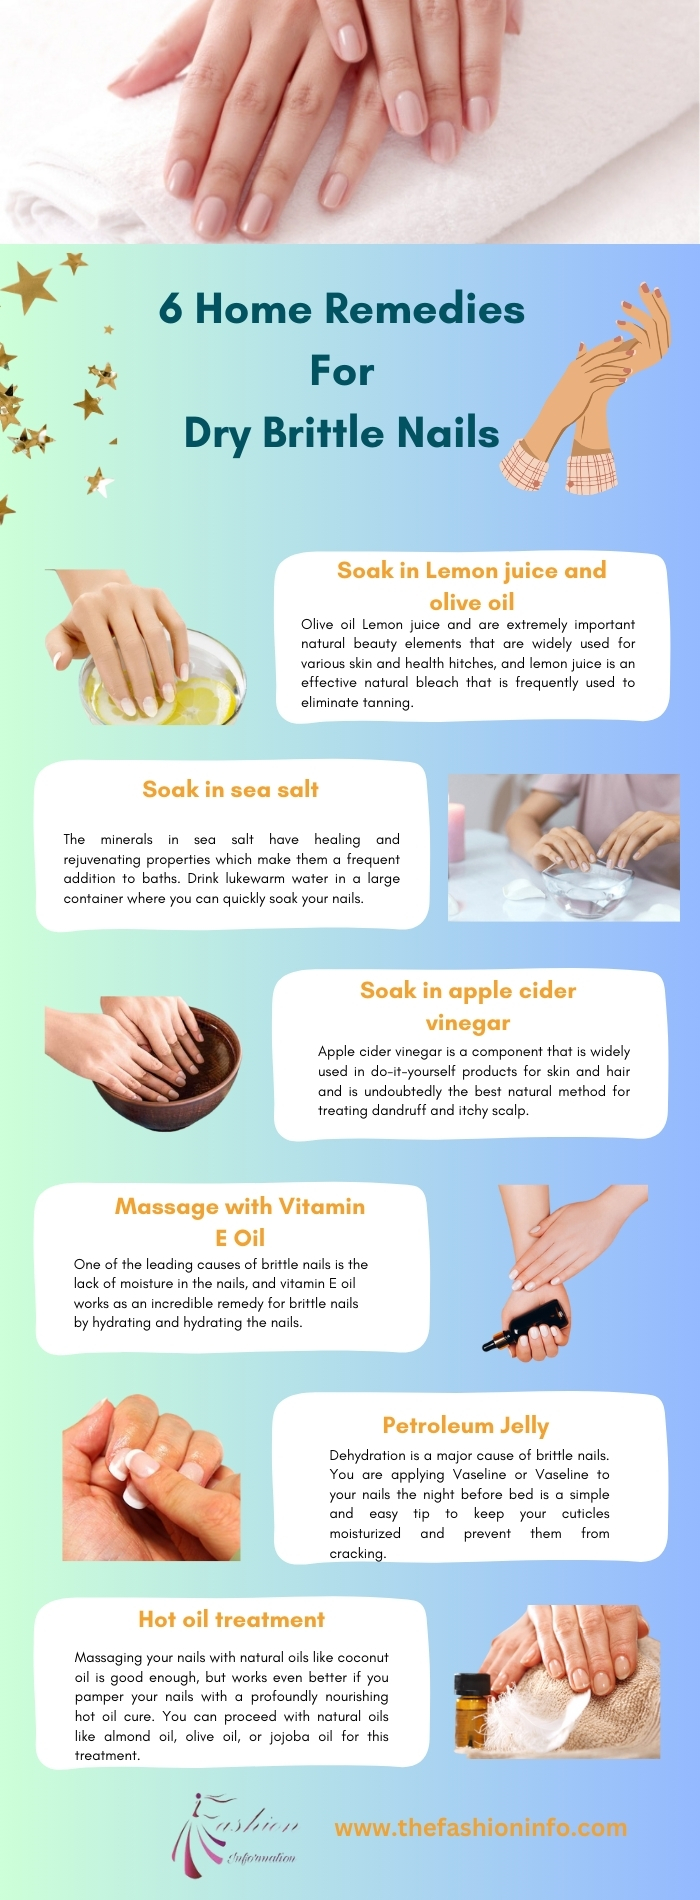 6 Home Remedies For Dry Brittle Nails 